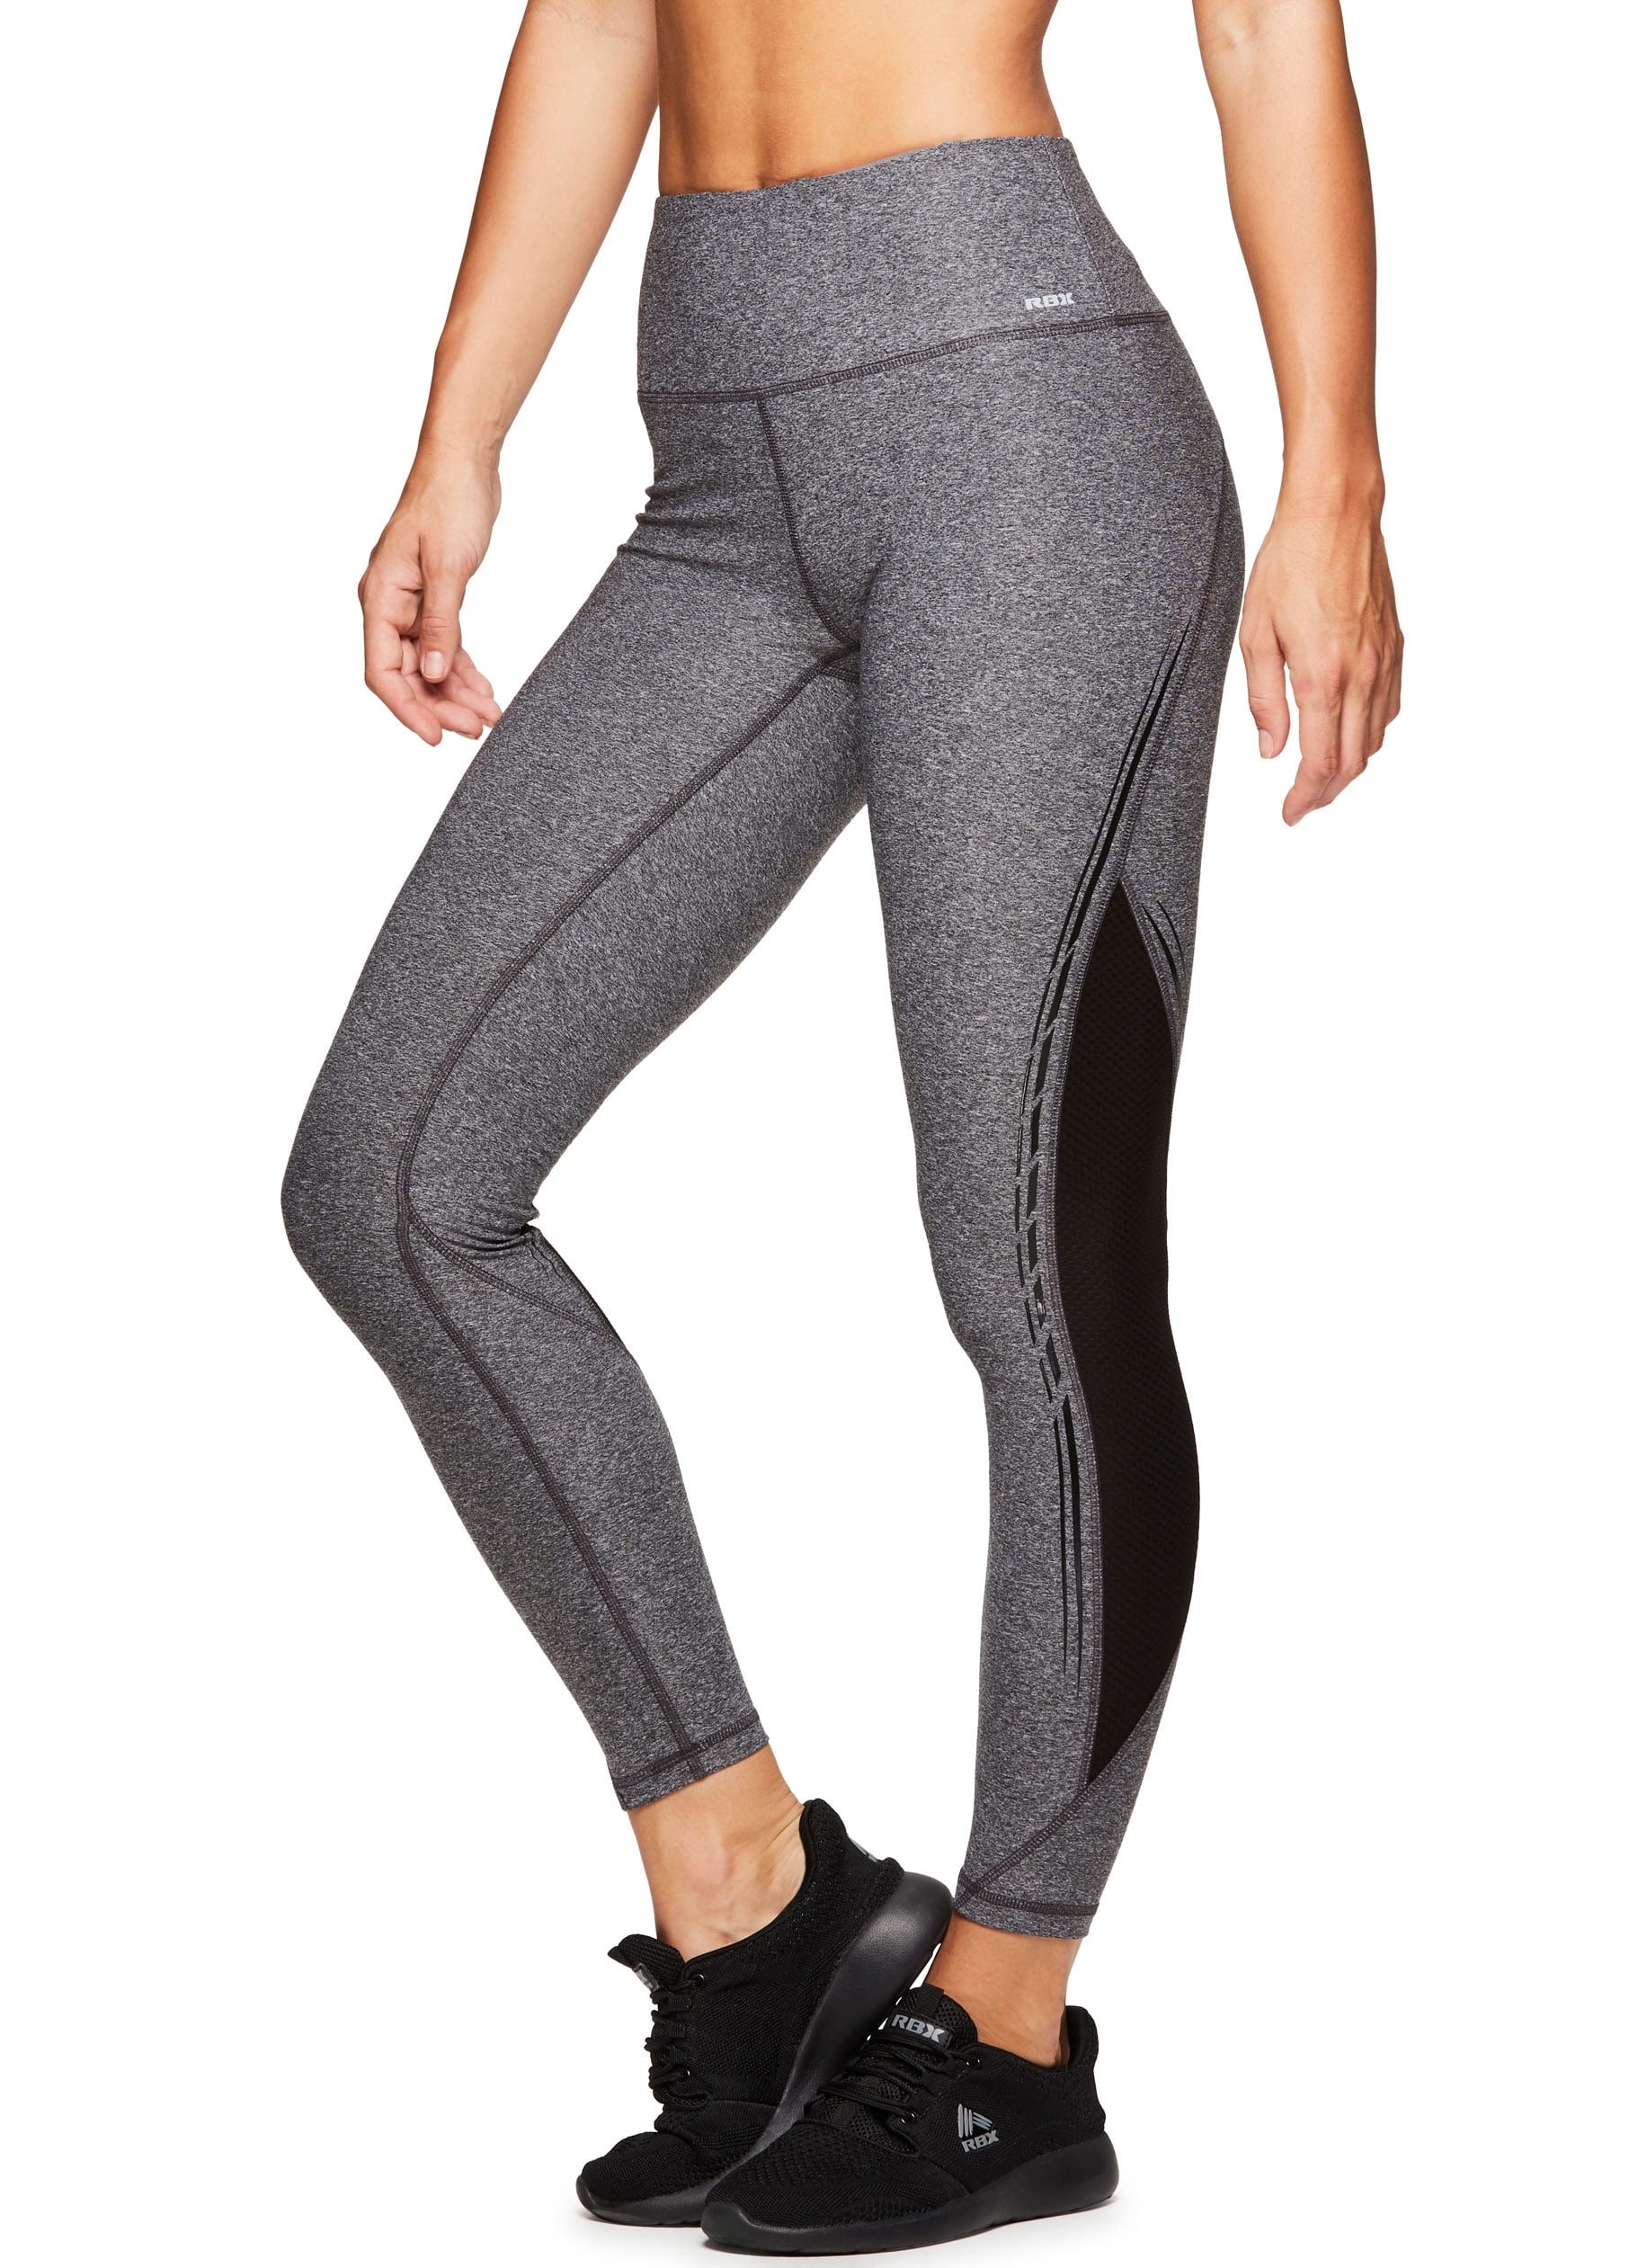 Rbx Active Leggings Reviews  International Society of Precision Agriculture